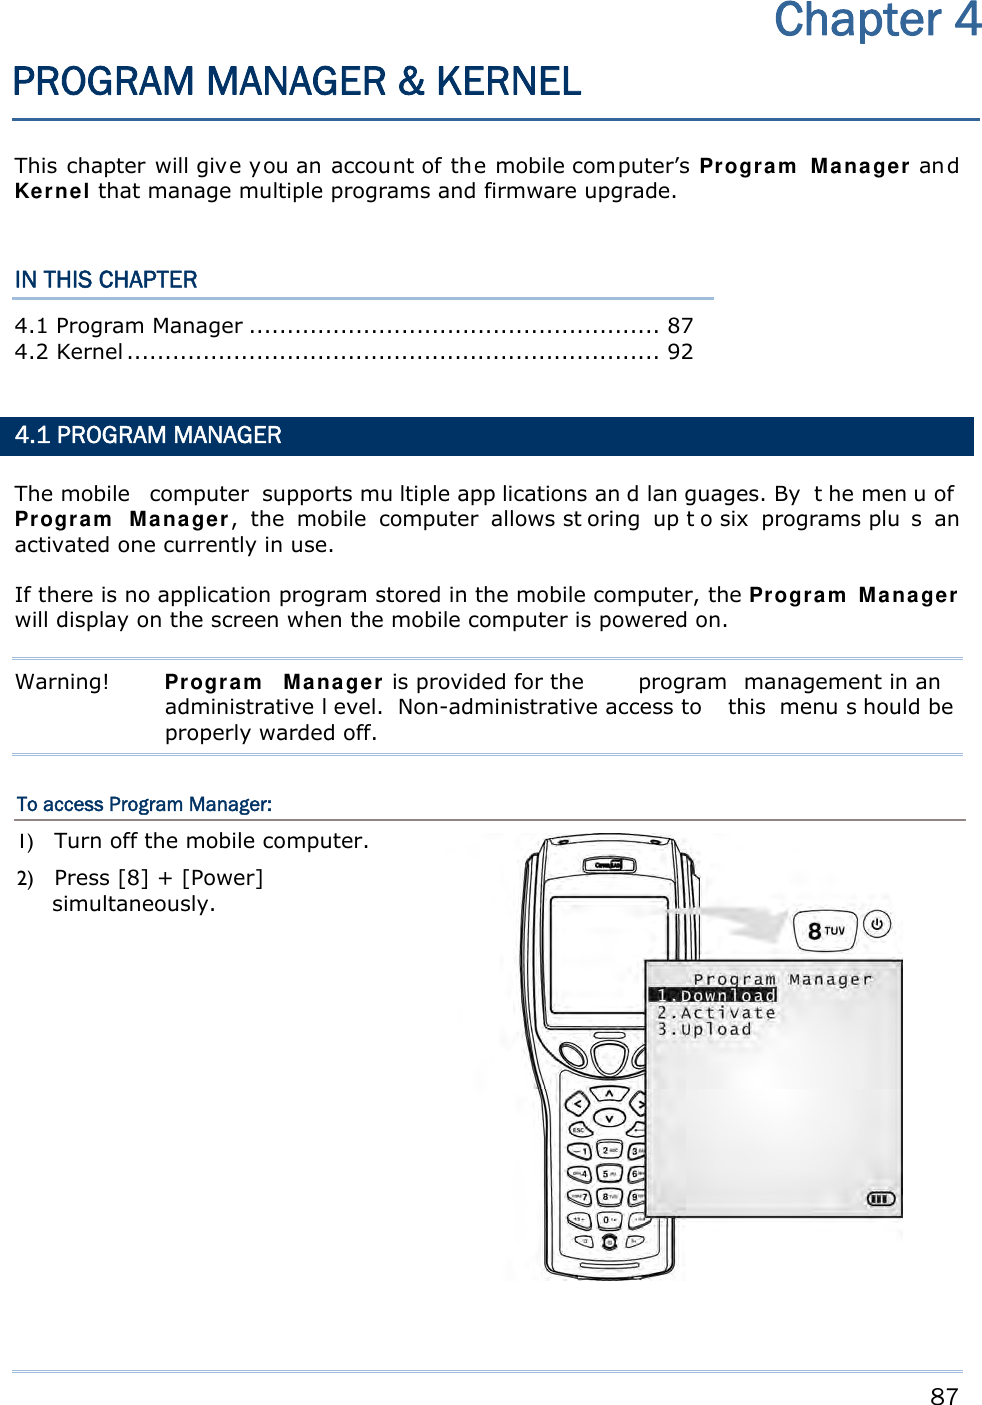     87   This chapter will give you an account of the mobile computer’s Pr ogr am  Ma na ge r an d Ker nel that manage multiple programs and firmware upgrade.  IN THIS CHAPTER 4.1 Program Manager ...................................................... 87 4.2 Kernel ...................................................................... 92   4.1 PROGRAM MANAGER The mobile   computer  supports mu ltiple app lications an d lan guages. By  t he men u of Progra m  Ma na ge r, the mobile computer allows st oring up t o six  programs plu s an activated one currently in use. If there is no application program stored in the mobile computer, the Pr ogra m  M an a ger will display on the screen when the mobile computer is powered on. Warning!  Progra m  M ana ger is provided for the  program management in an  administrative l evel.  Non-administrative access to  this  menu s hould be properly warded off. To access Program Manager: 1) Turn off the mobile computer. 2) Press [8] + [Power] simultaneously.   Chapter 4 PROGRAM MANAGER &amp; KERNEL 